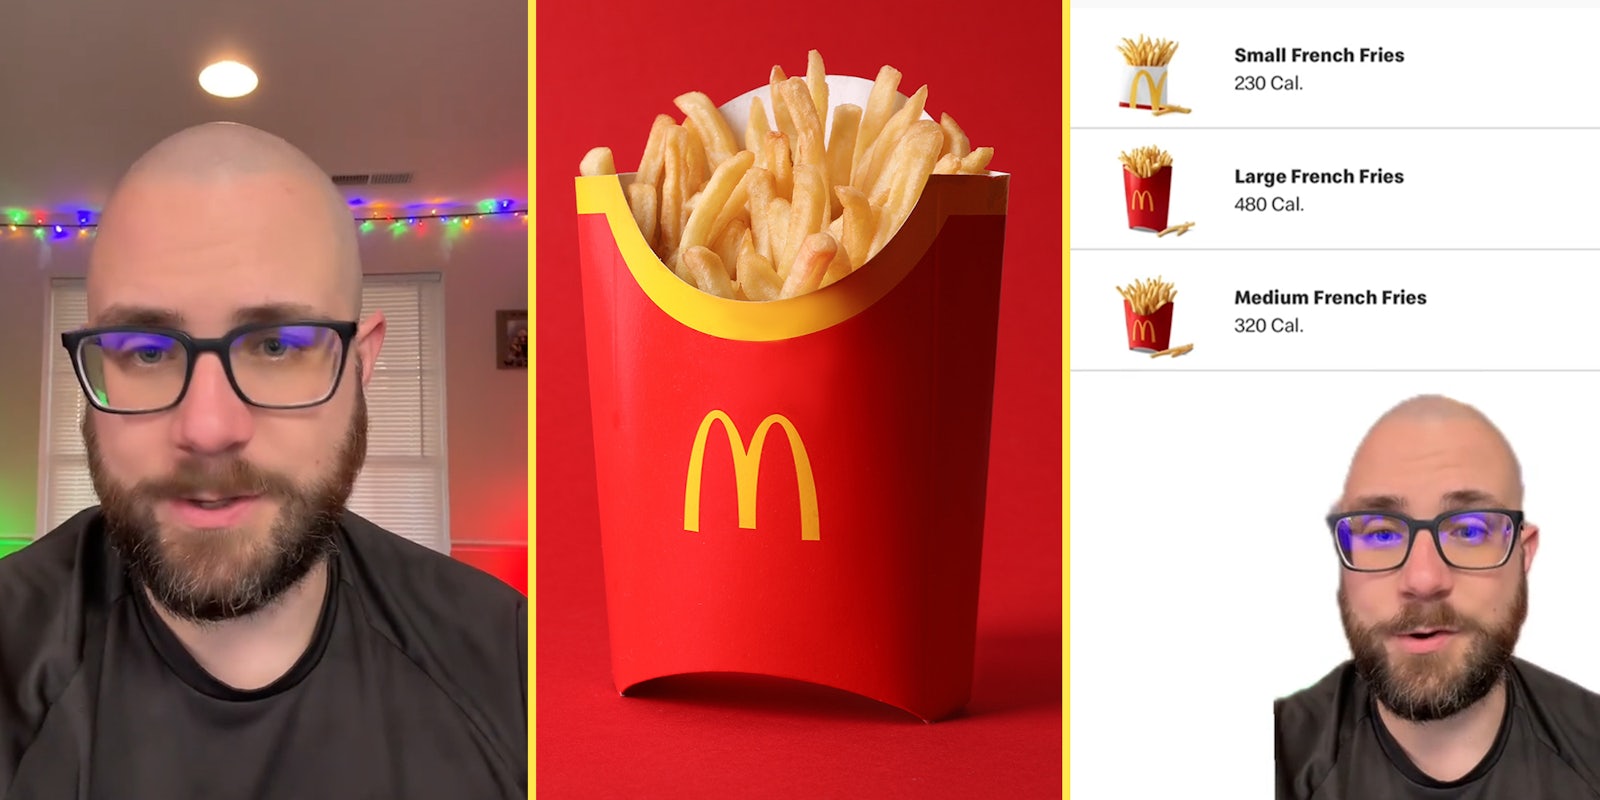 McDonald’s customer exposes sneaky layout in app for $1.19 french fry deal